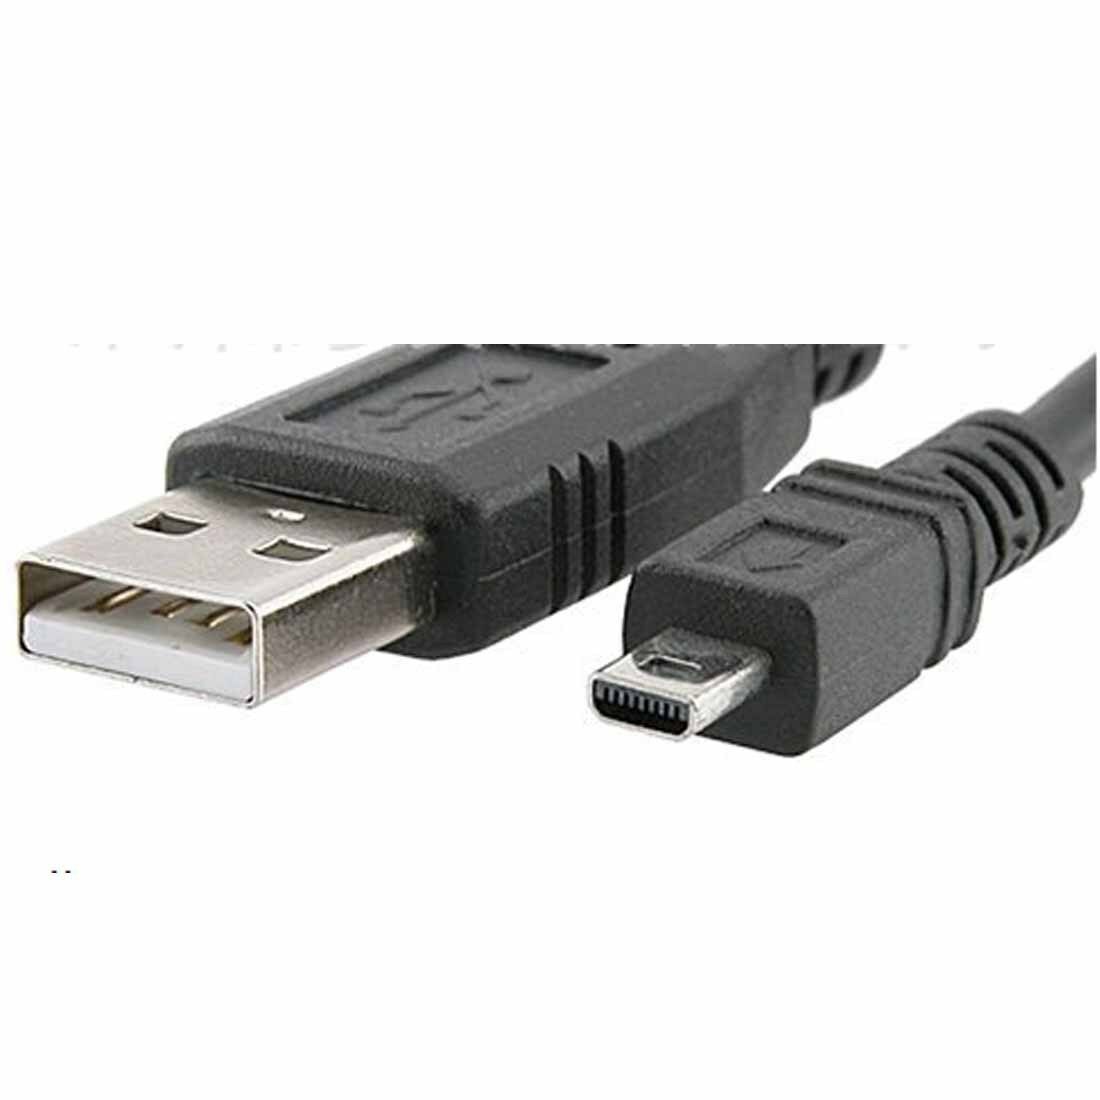 USB SYNC DATA CABLE FOR KODAK EASYSHARE-ONE Cameras 4 MP 6 MP M1033 M1063 M1073